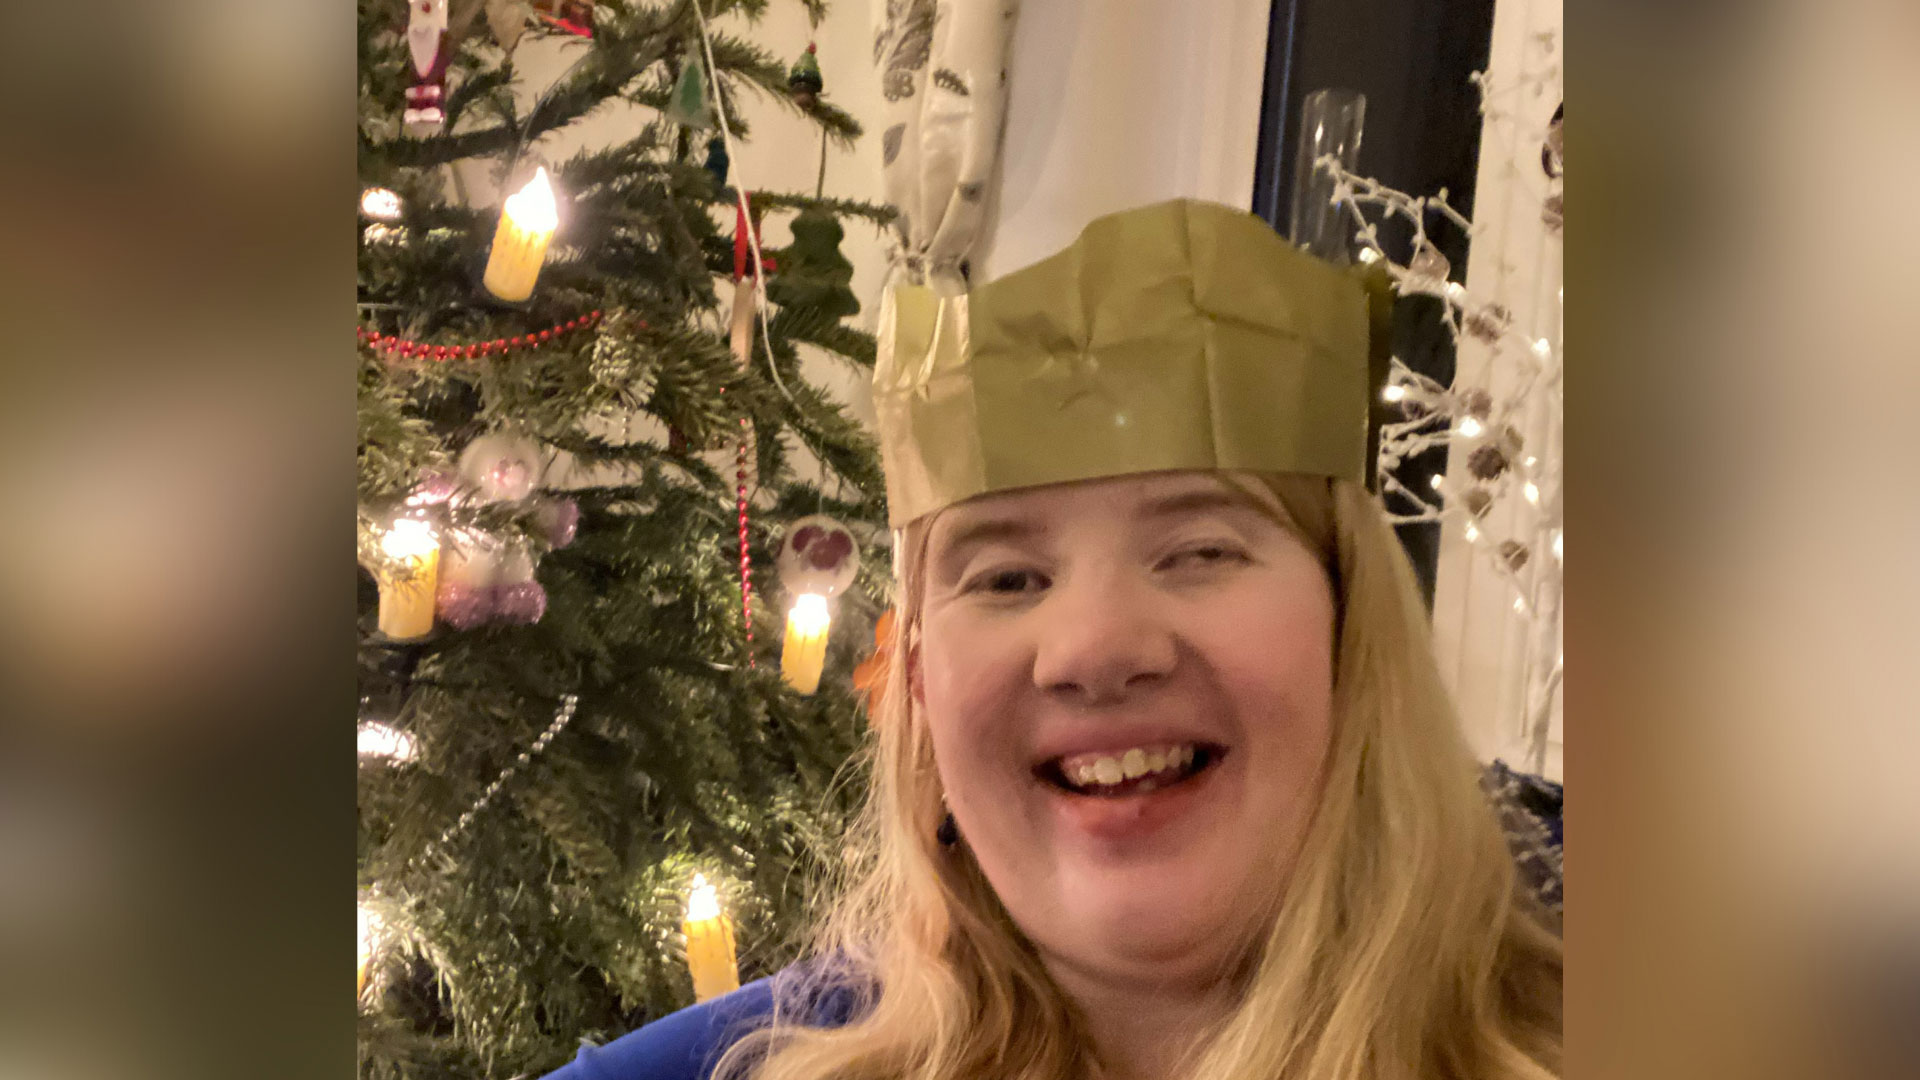 Campaigner Naomi is a white woman with a visible difference and long blonde hair. She is wearing a gold Christmas cracker hat and stood in front of a decorated Christmas tree